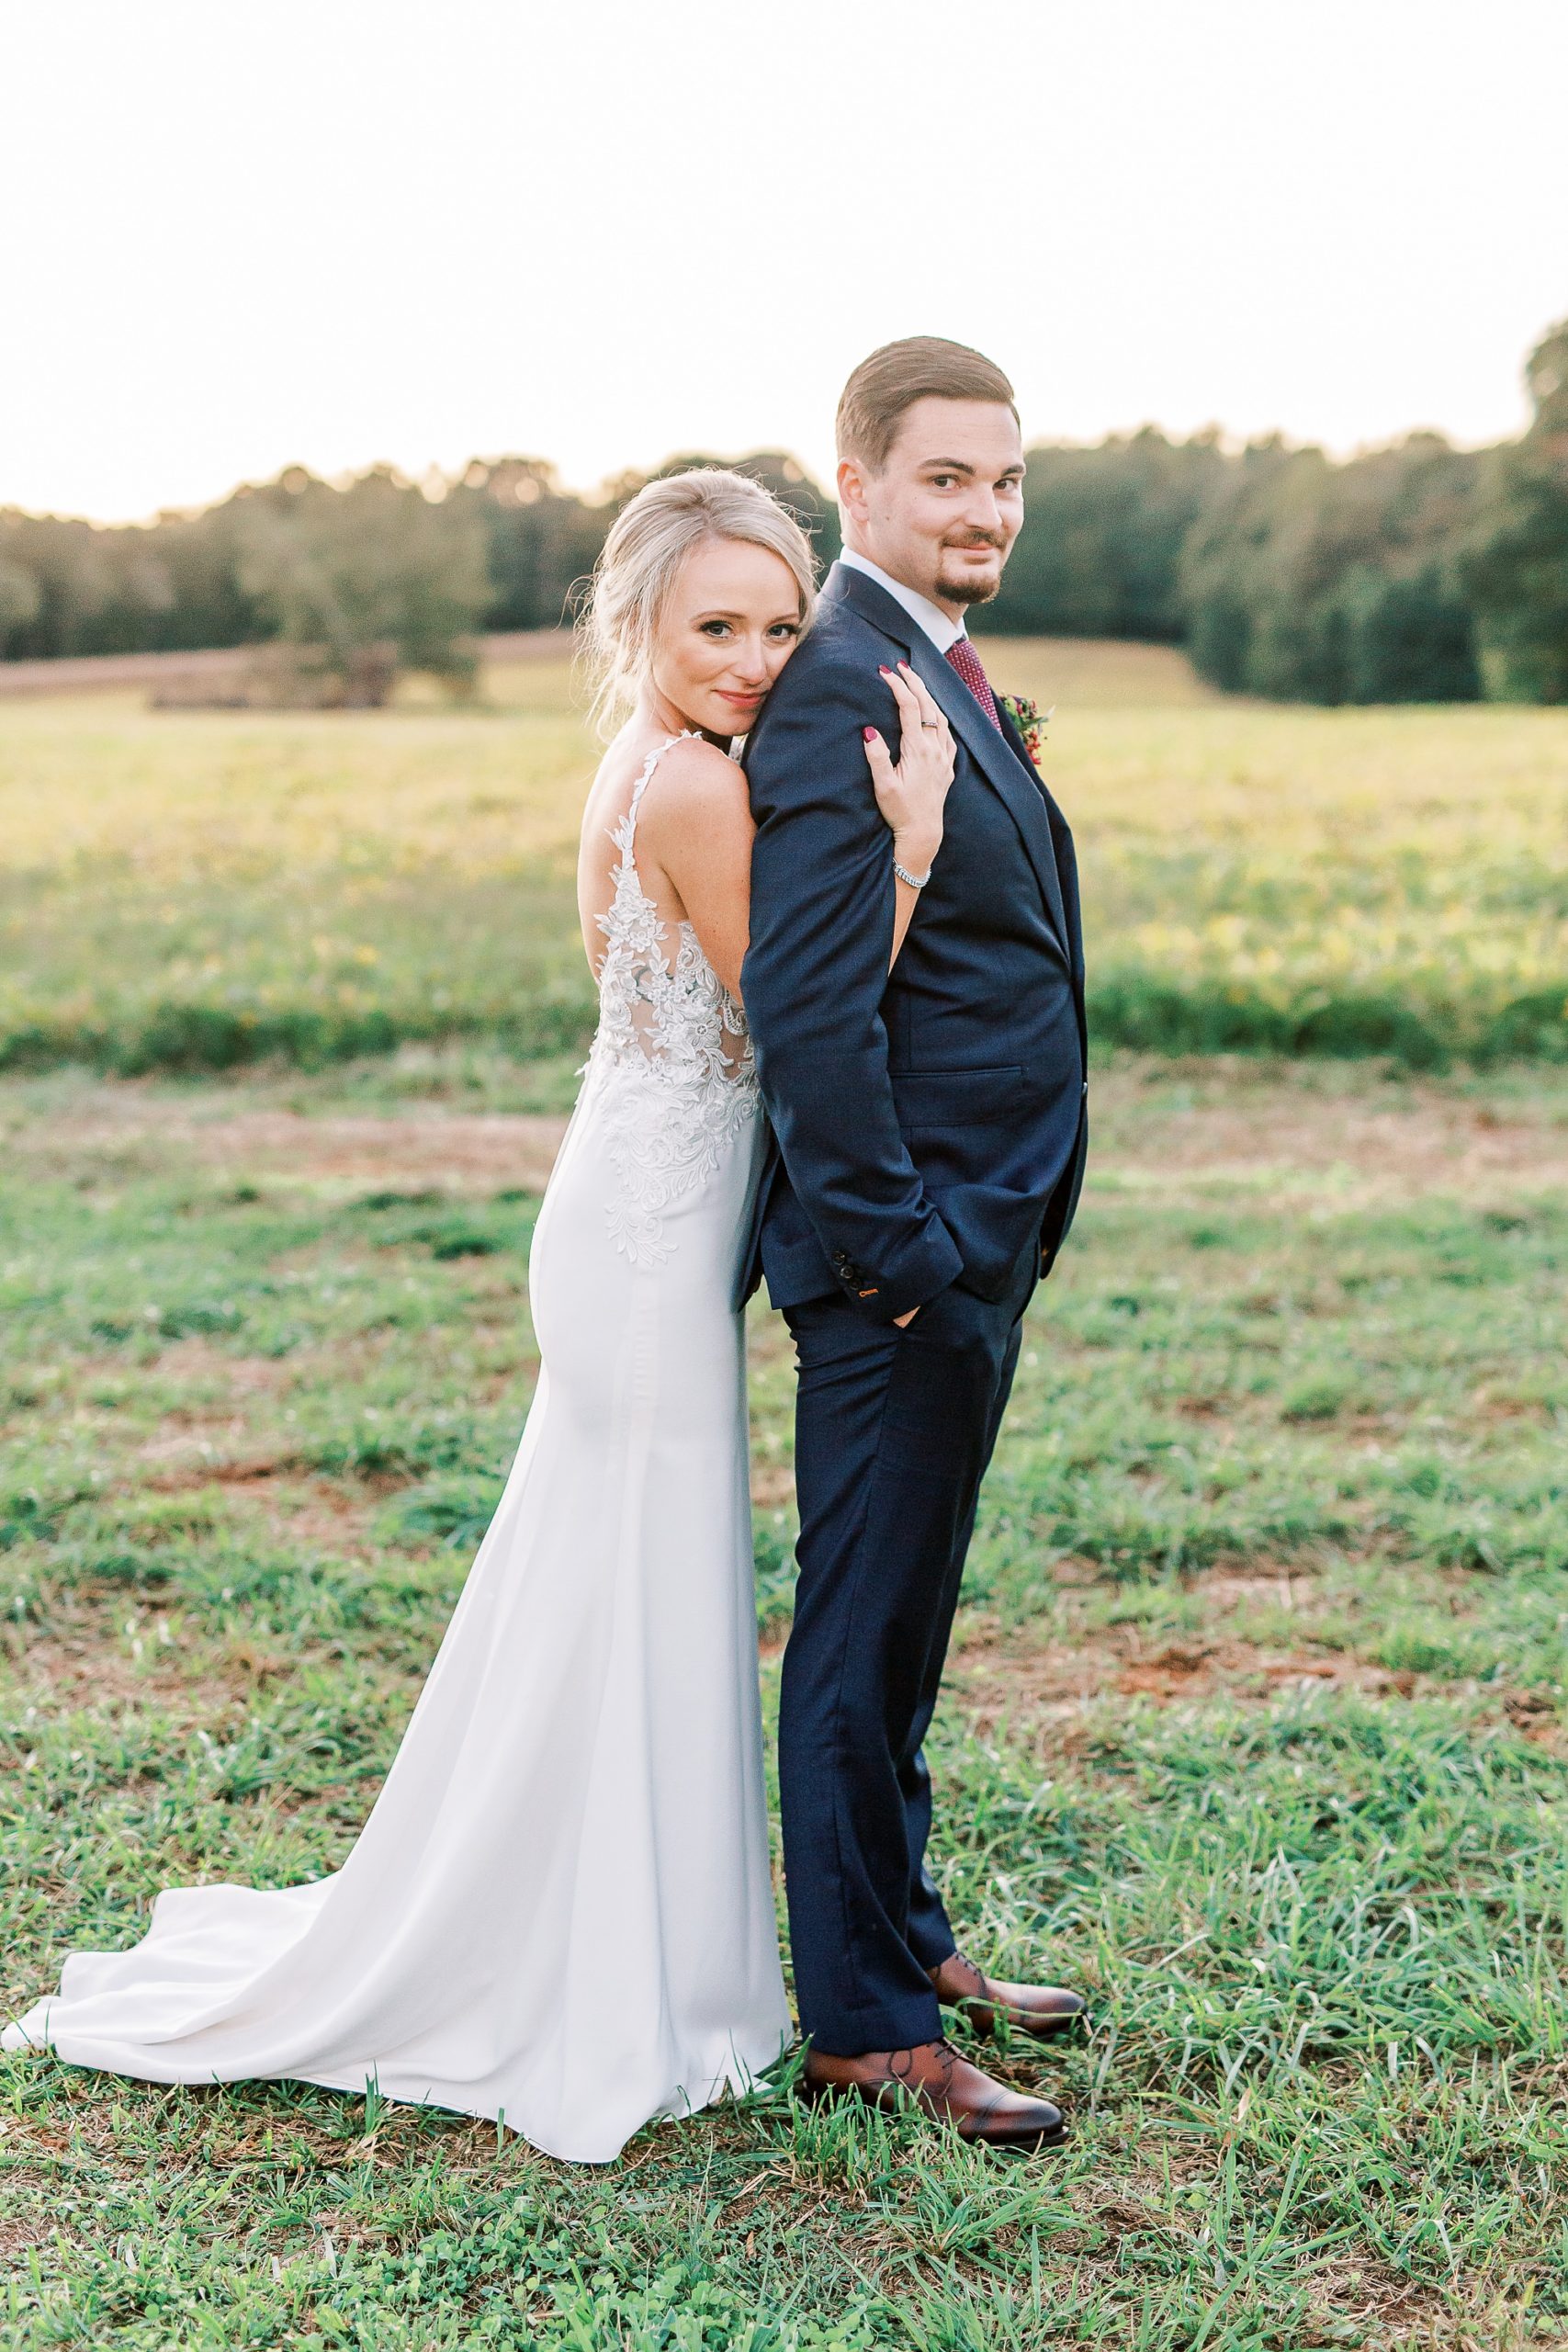 Intimate Andrews Farm elopement for couple with classic details in 2020